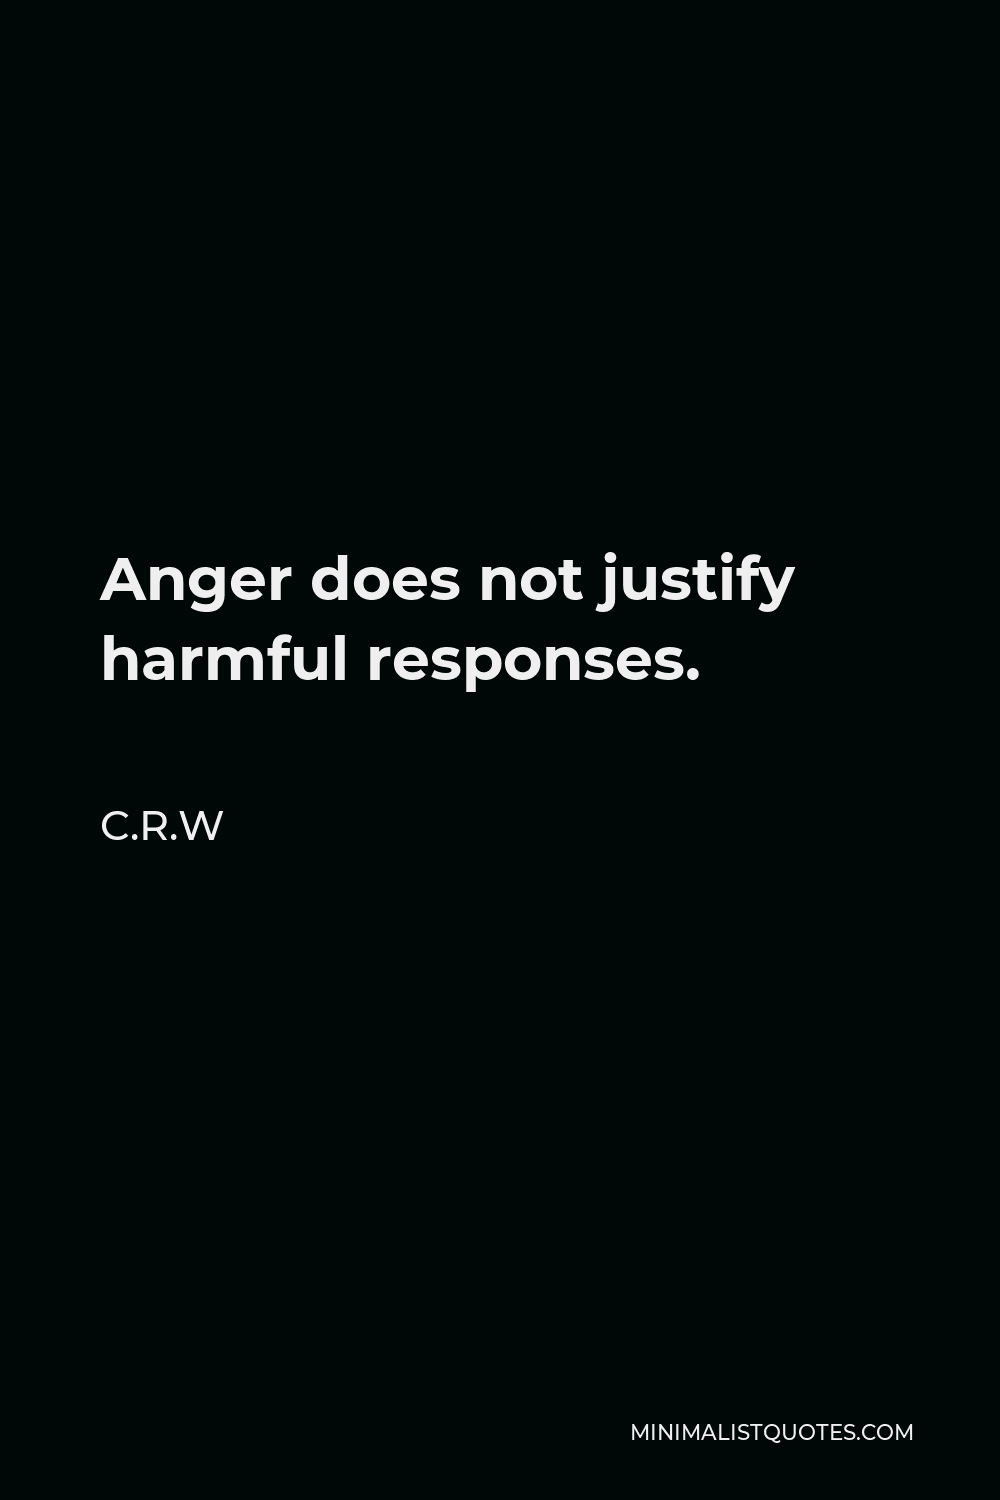 C.R.W Quote - Anger does not justify harmful responses.